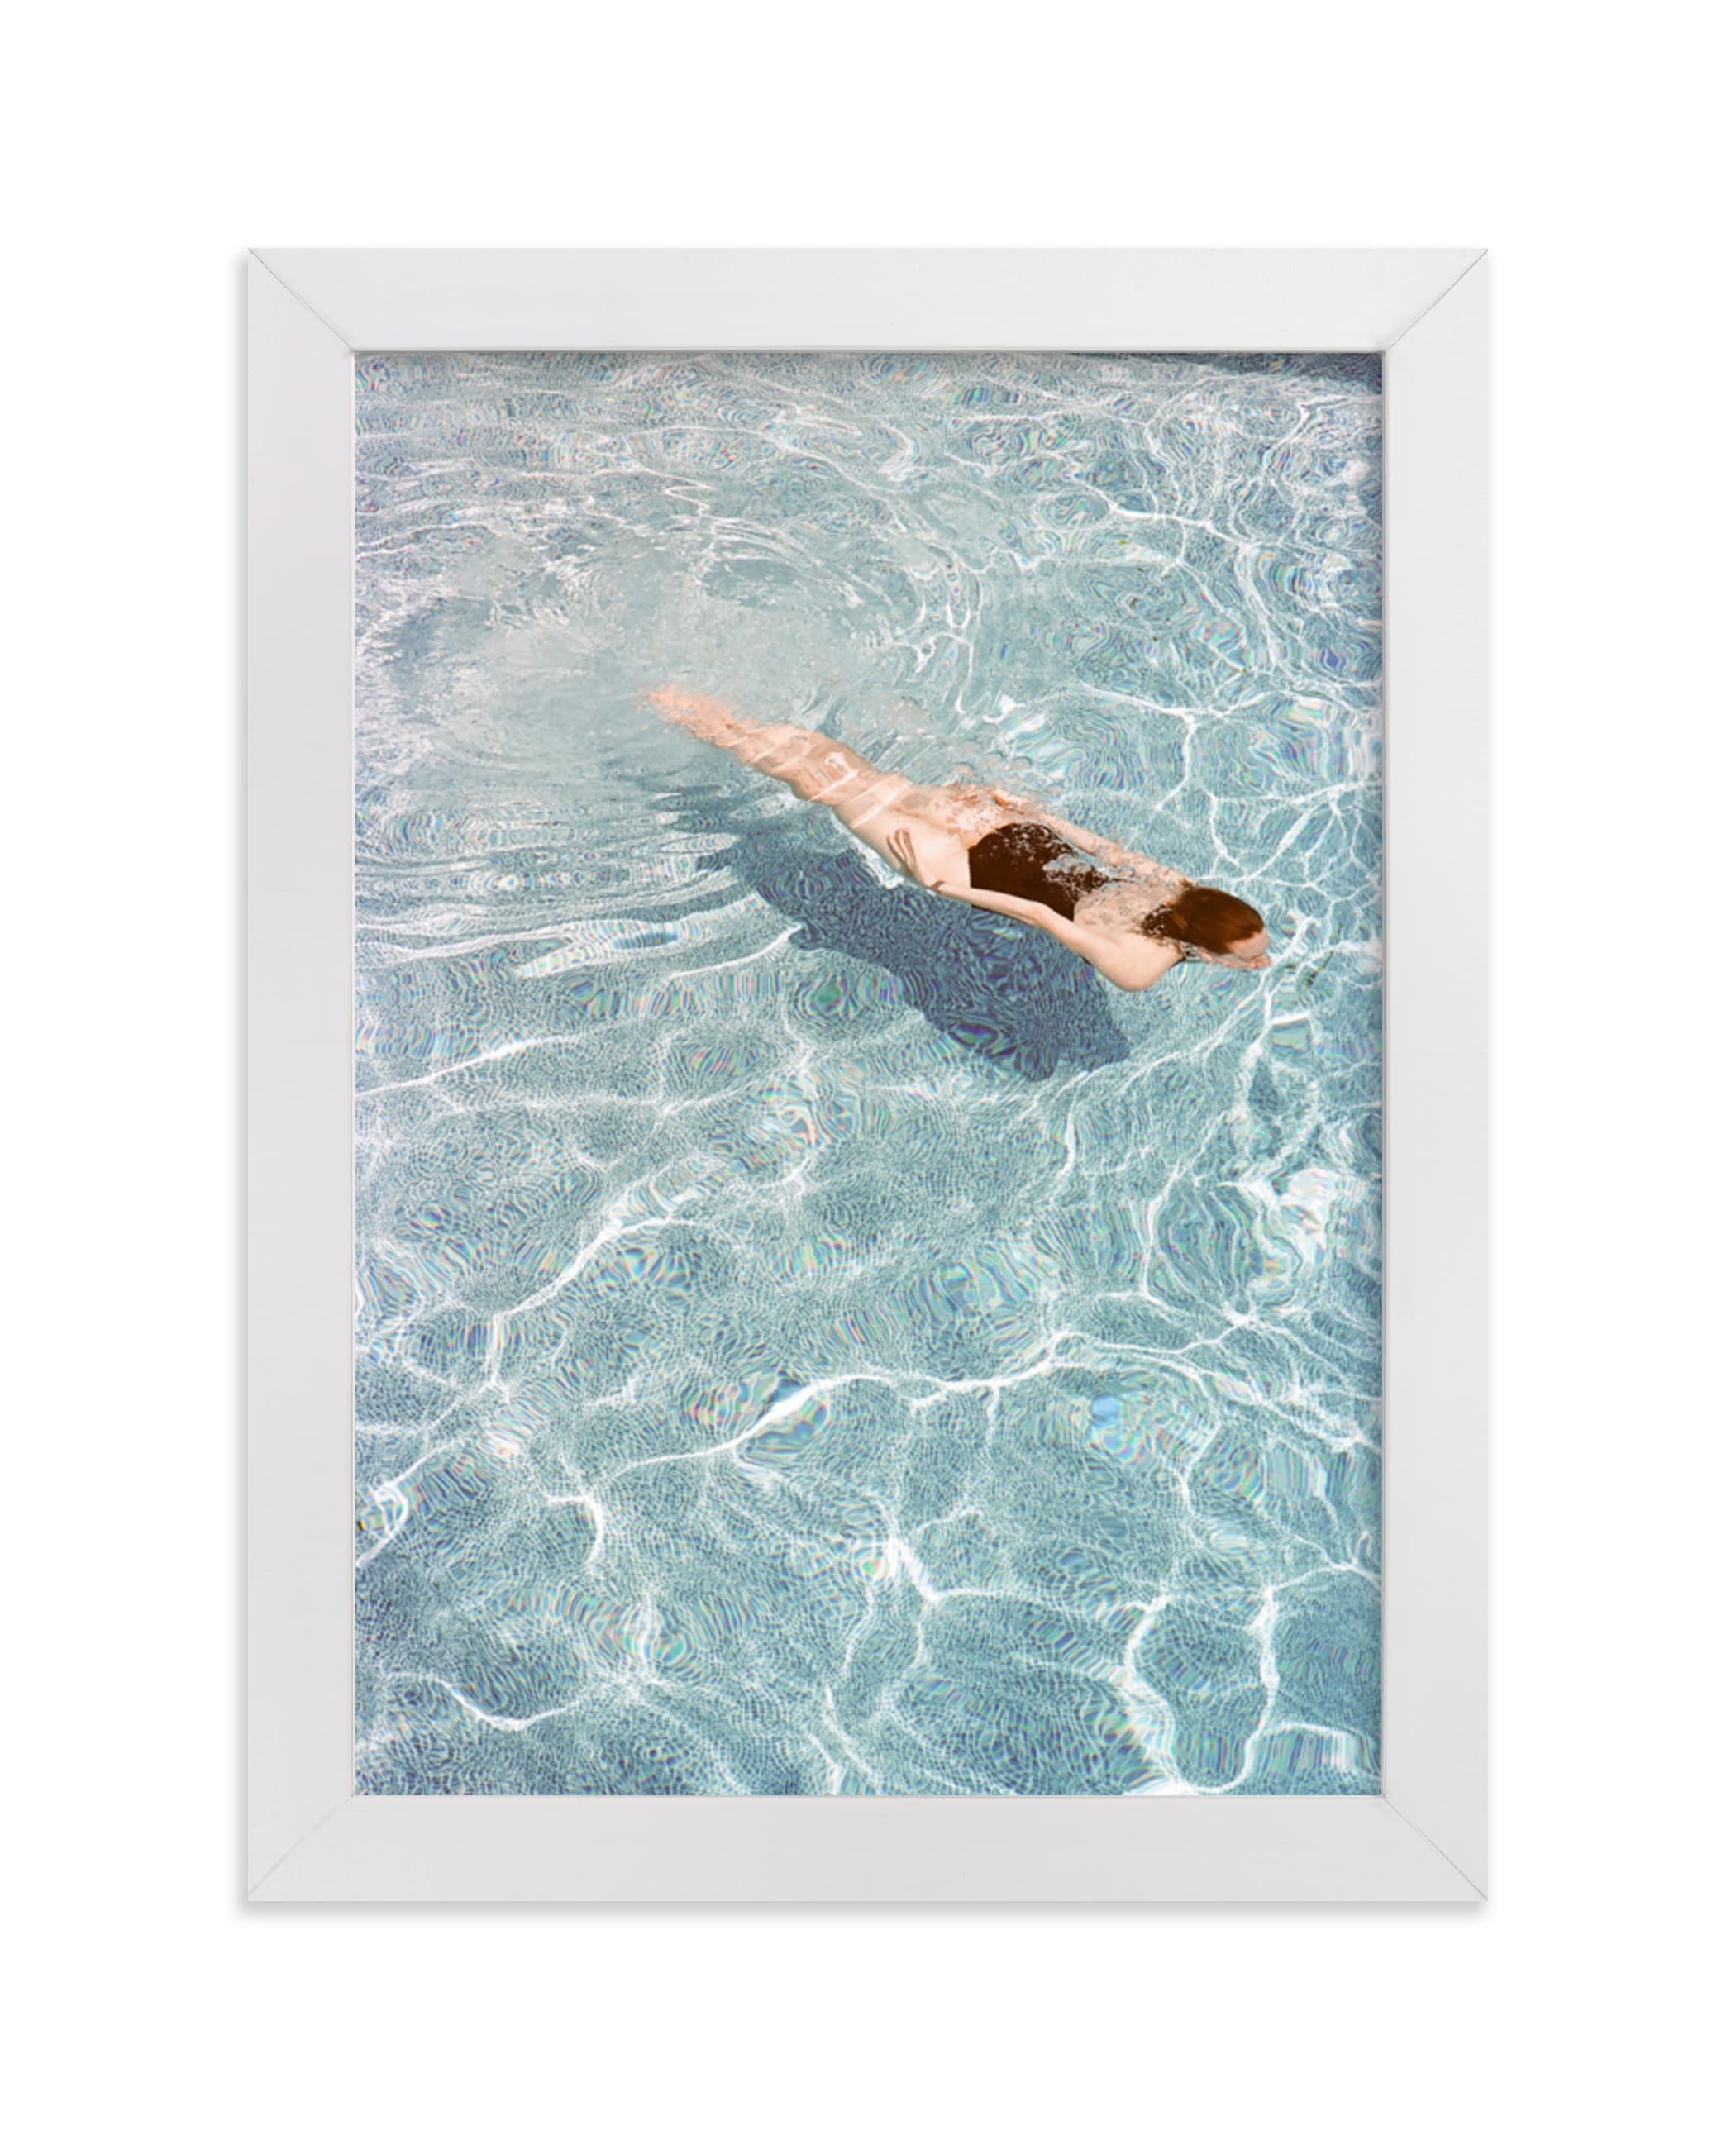 Going for a Swim - 5" x 7"White Wood Frame - Image 0